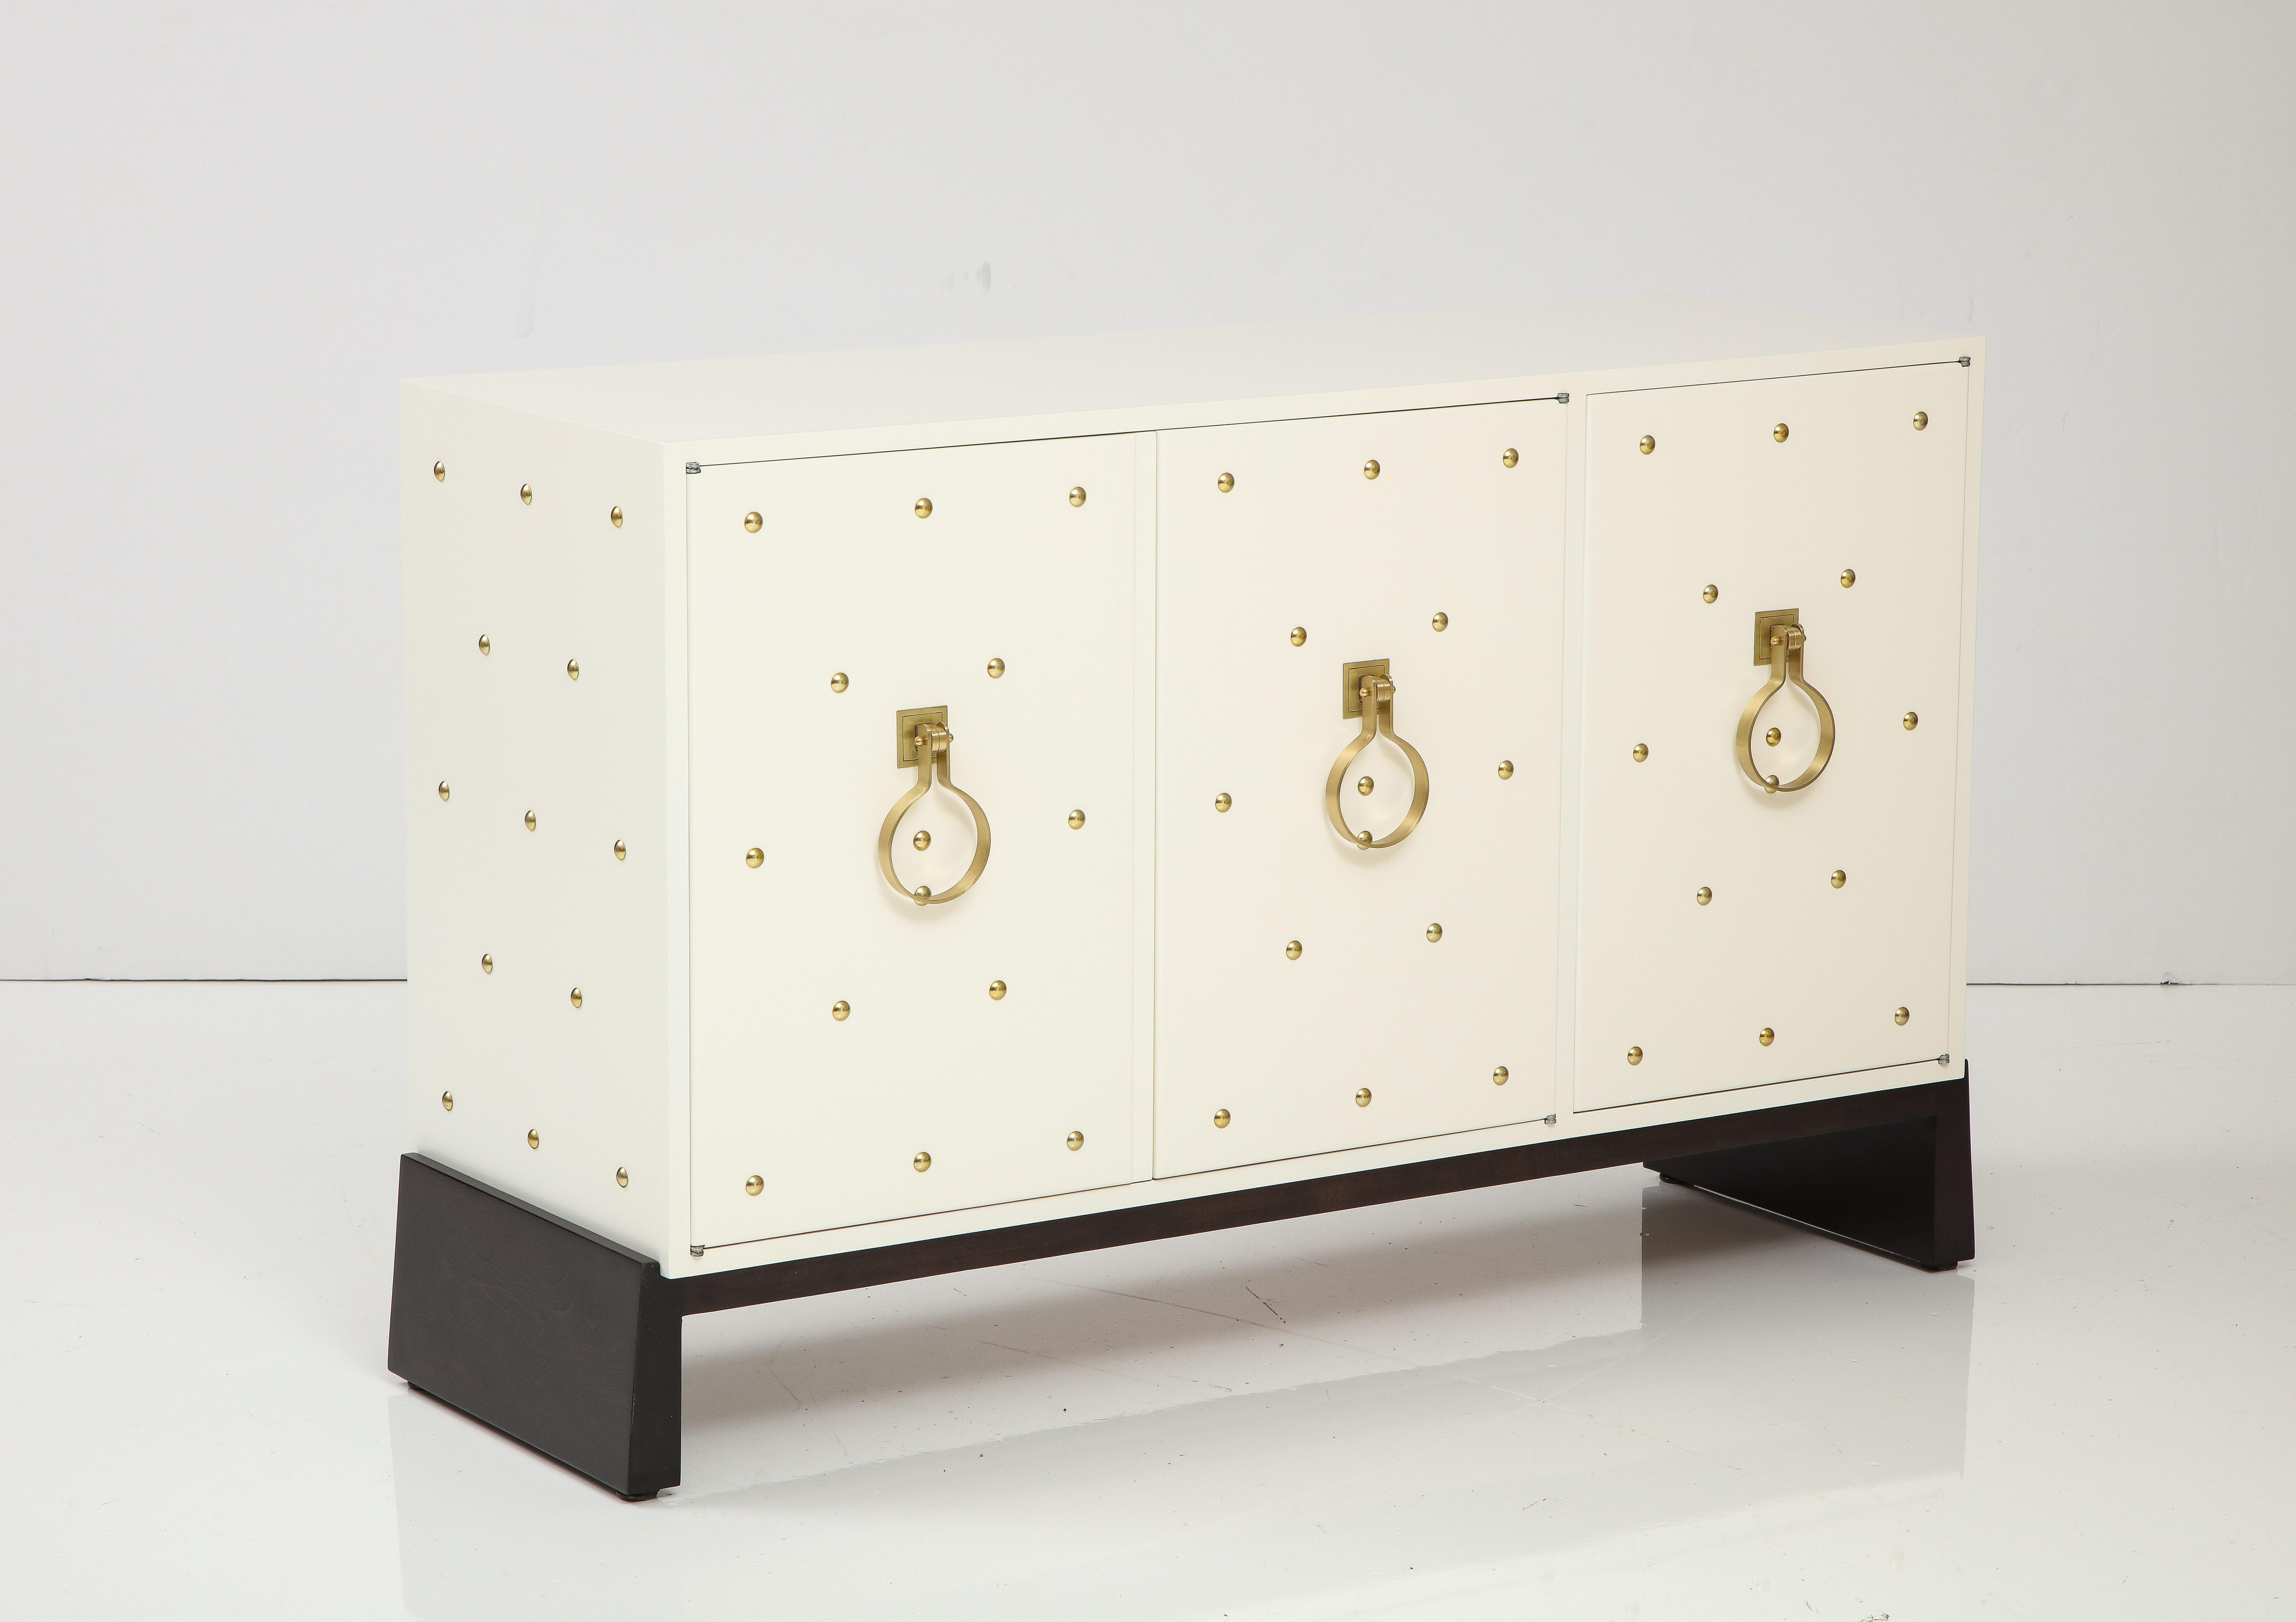 Tommi Parzinger for Parzinger Originals three door studded cabinet. 
The cabinet has been Newly restored in a soft white Matte finish and brass studs and sits on an espresso colored plinth base.
The interior has a single interior drawer with the